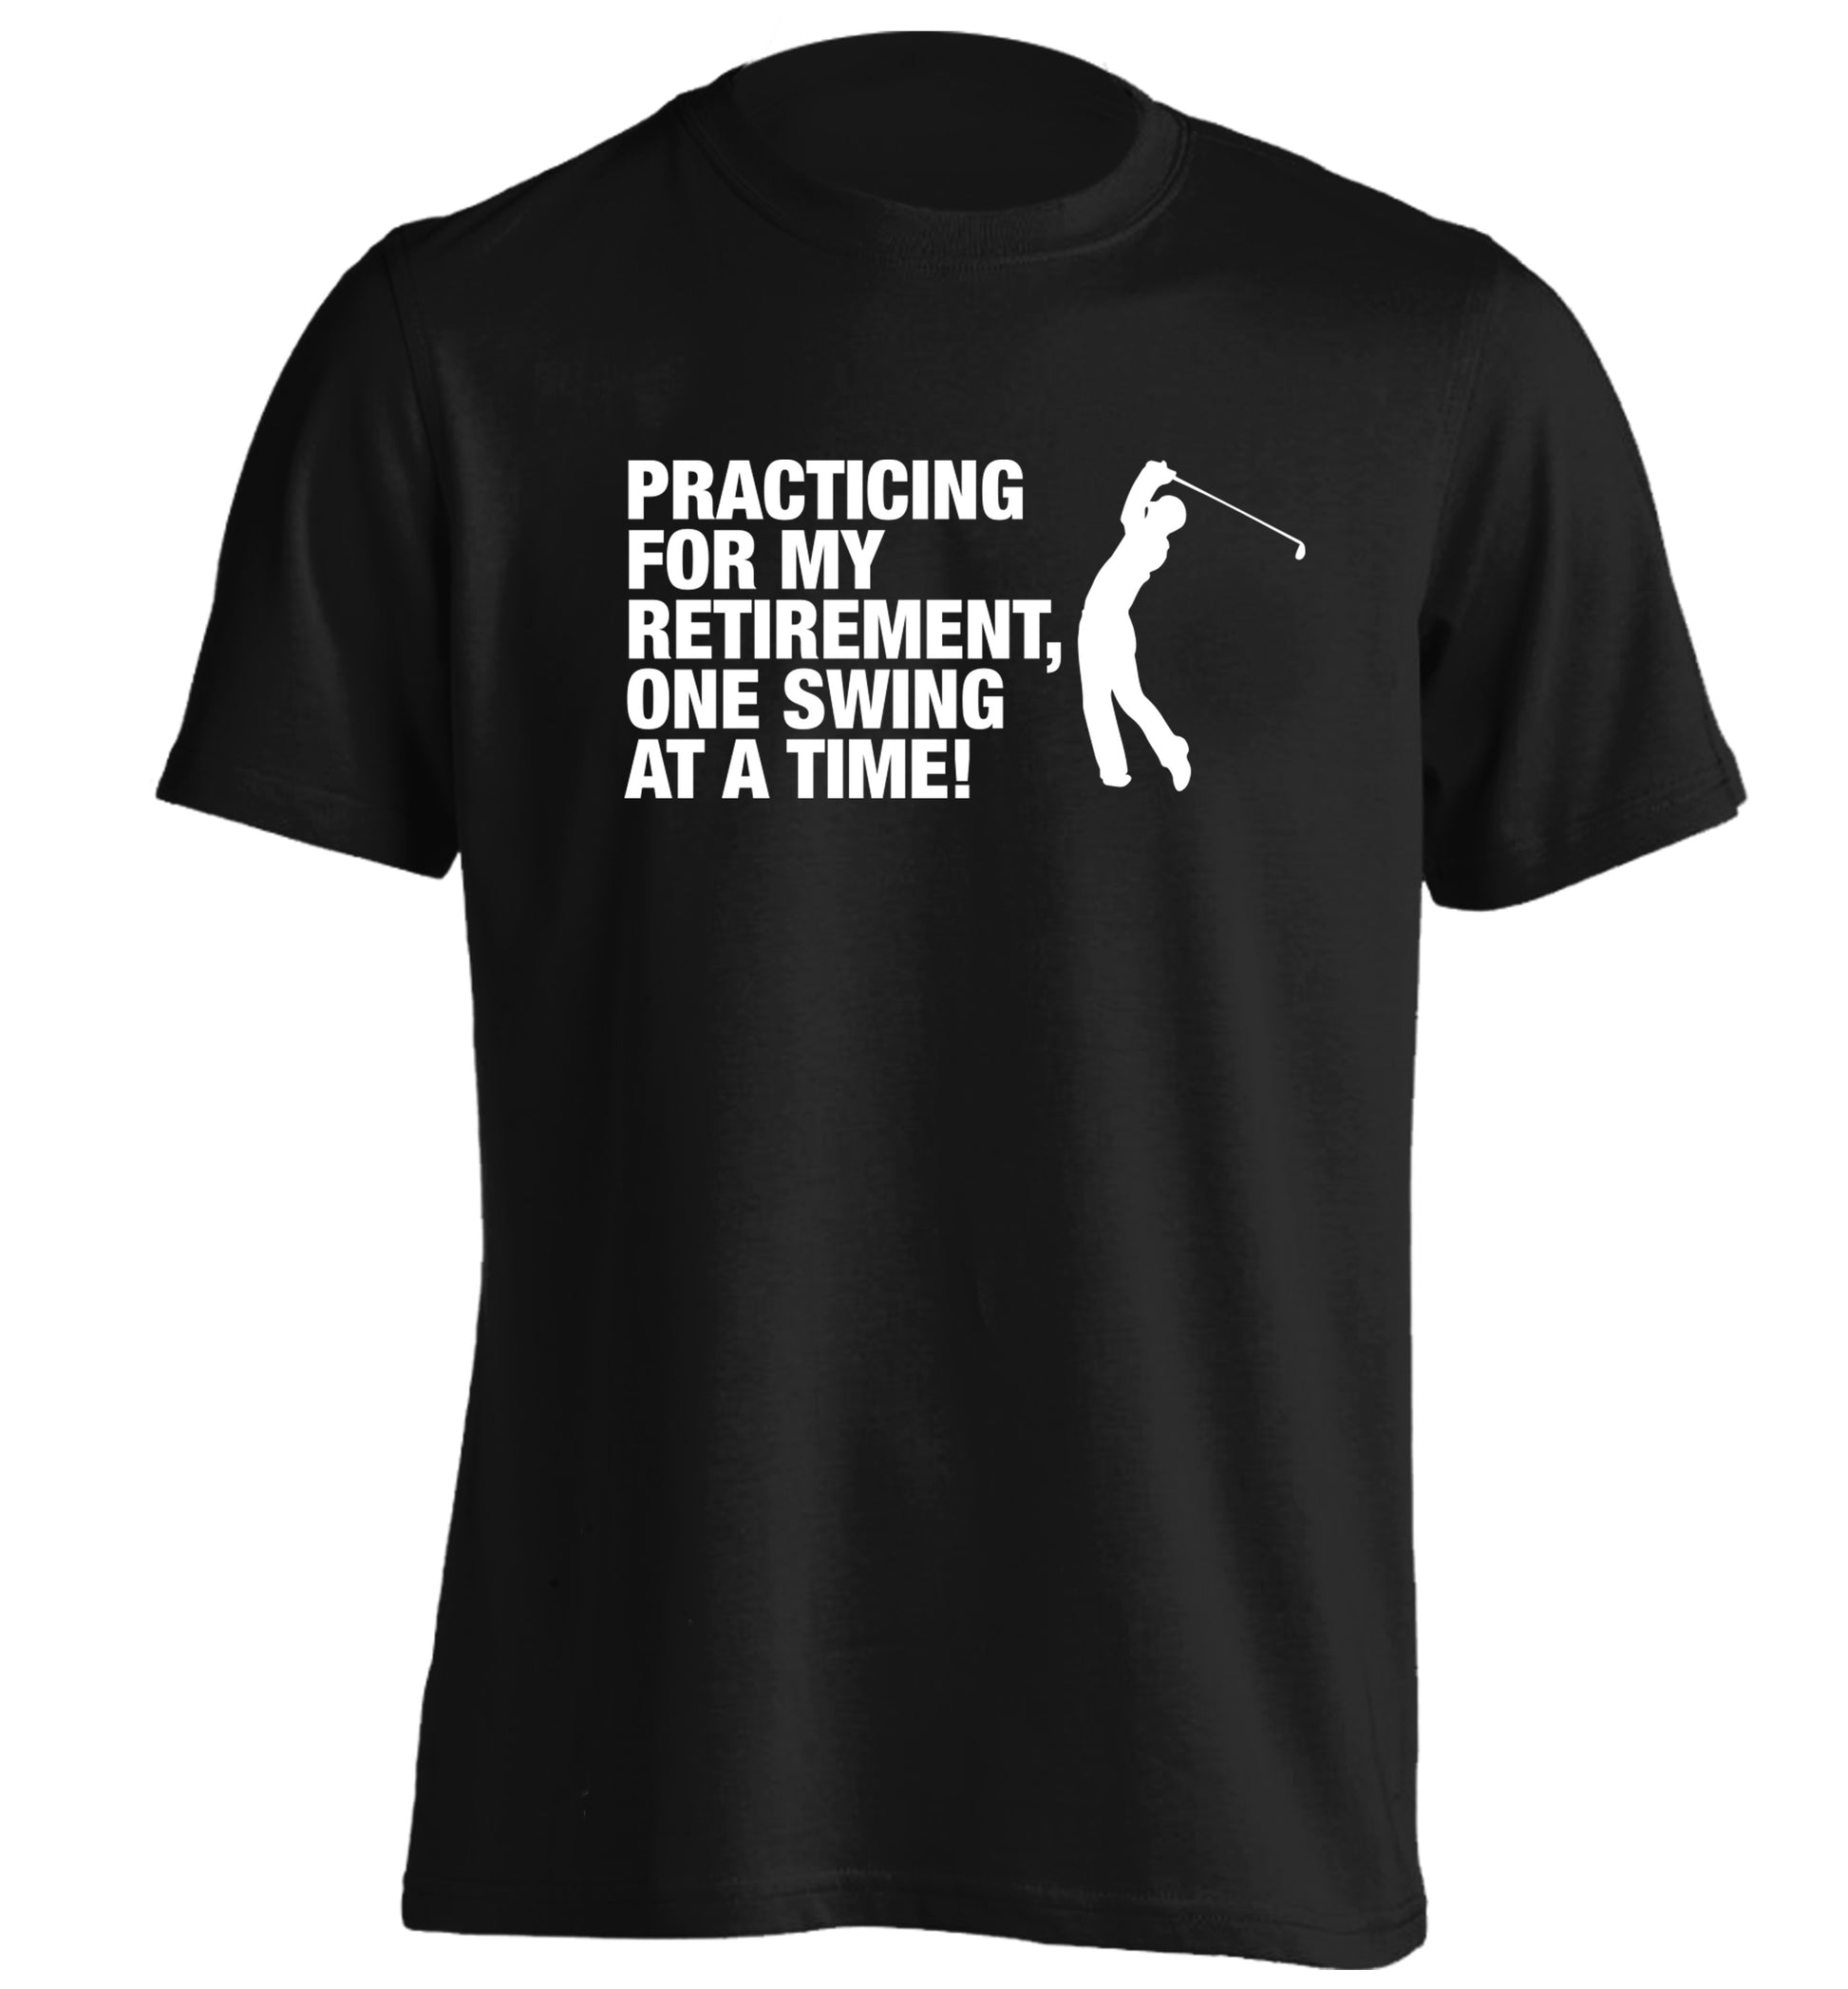 Practicing for my retirement one swing at a time adults unisex black Tshirt 2XL